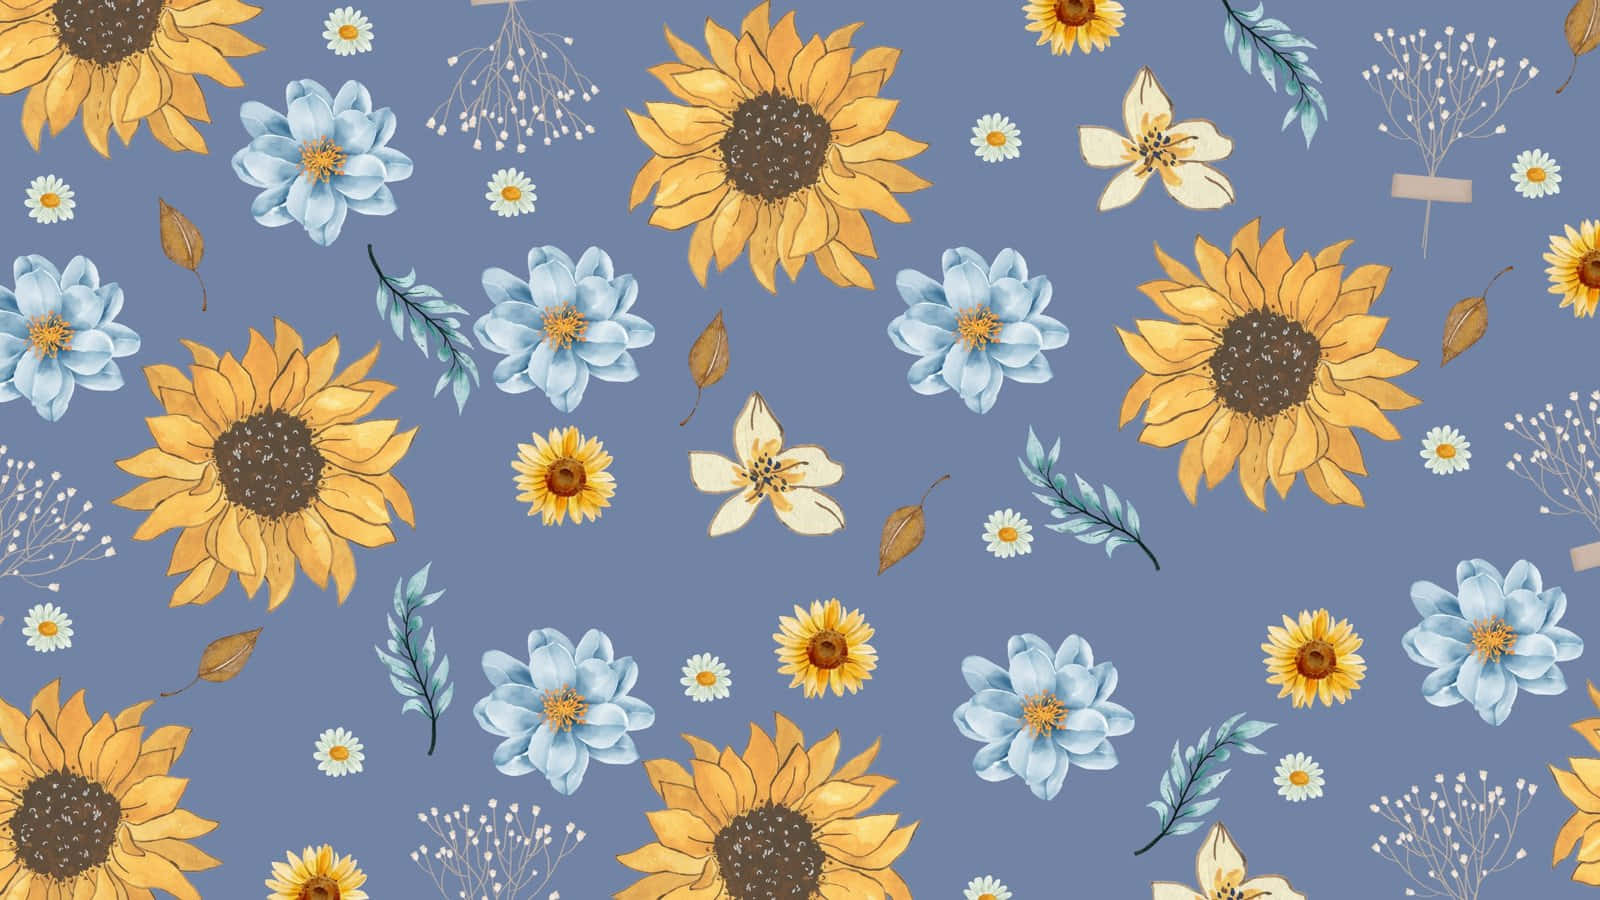 Work in Style With a Floral Computer Wallpaper